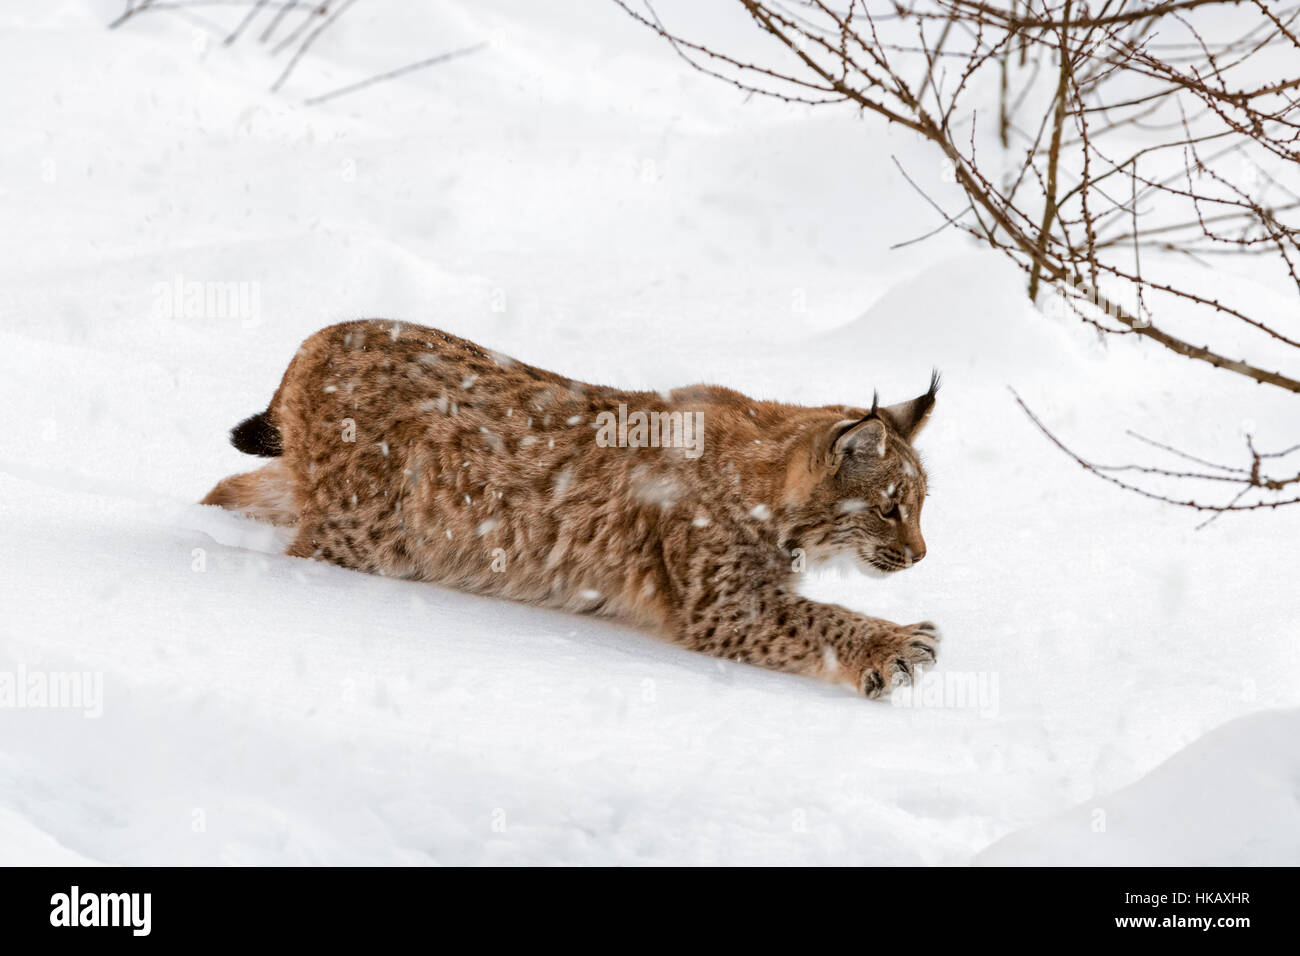 Juvenile one year old Eurasian lynx (Lynx lynx) stalking prey with outstretched claws during snow shower in winter Stock Photo